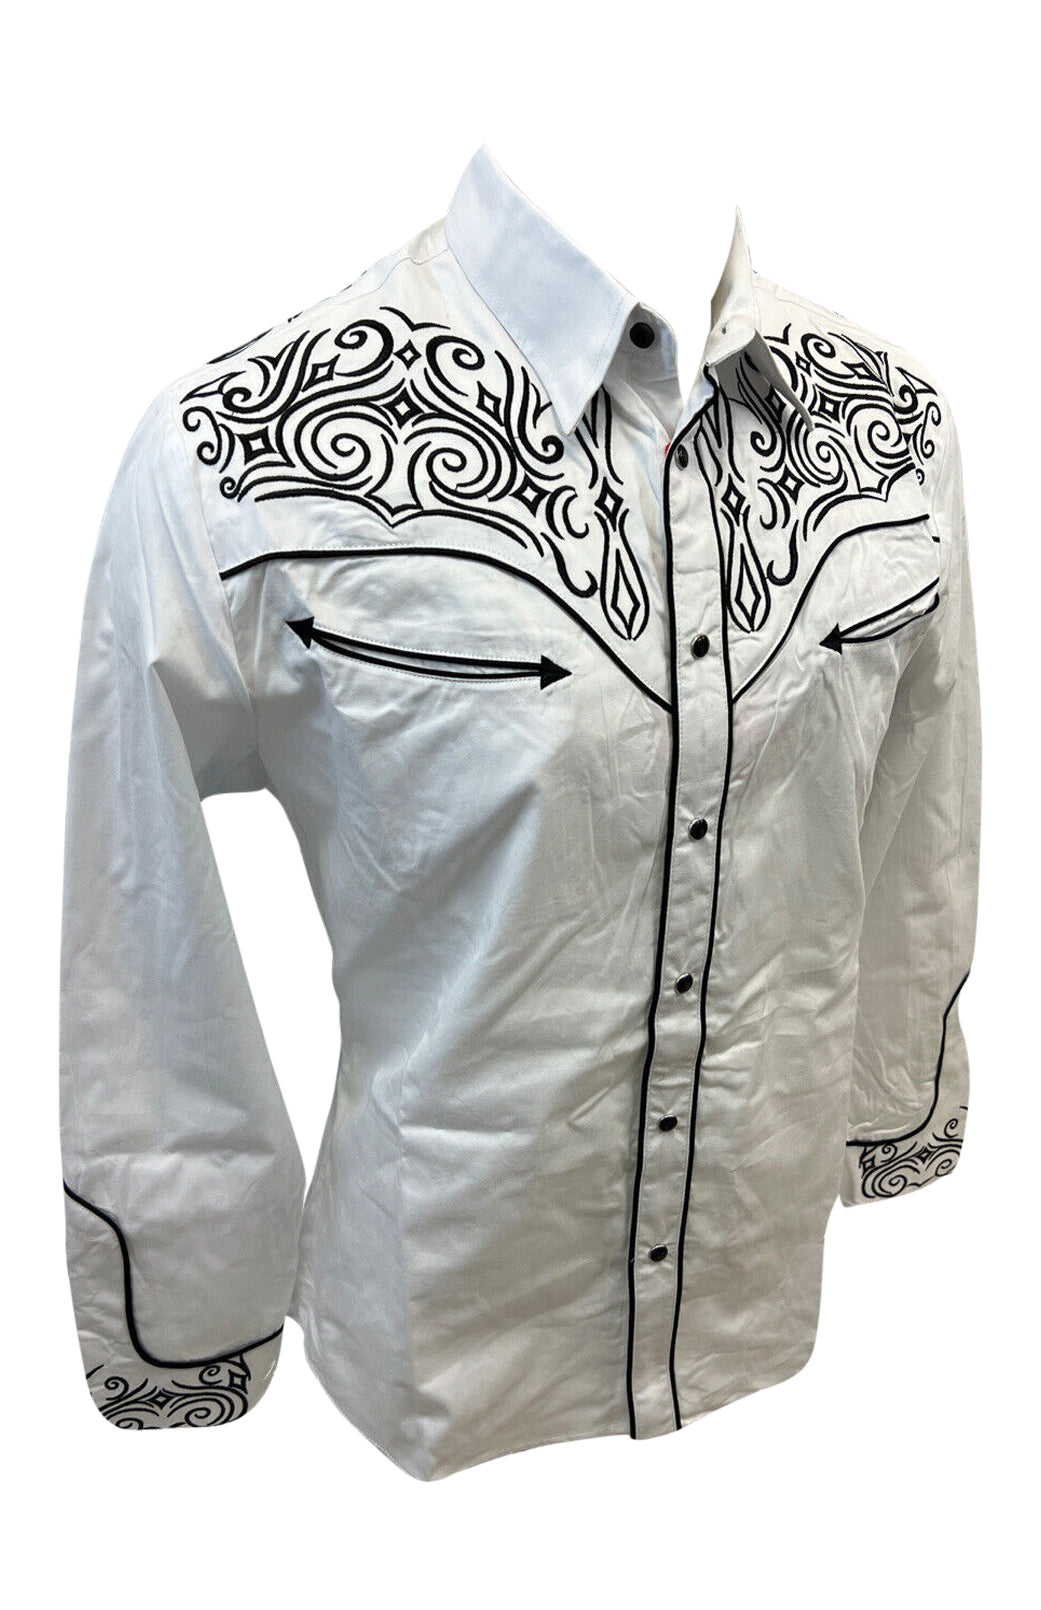 Mens RODEO WESTERN COUNTRY WHITE BLACK STITCH TRIBAL LUCKY HORSESHOE Shirt Cowboy